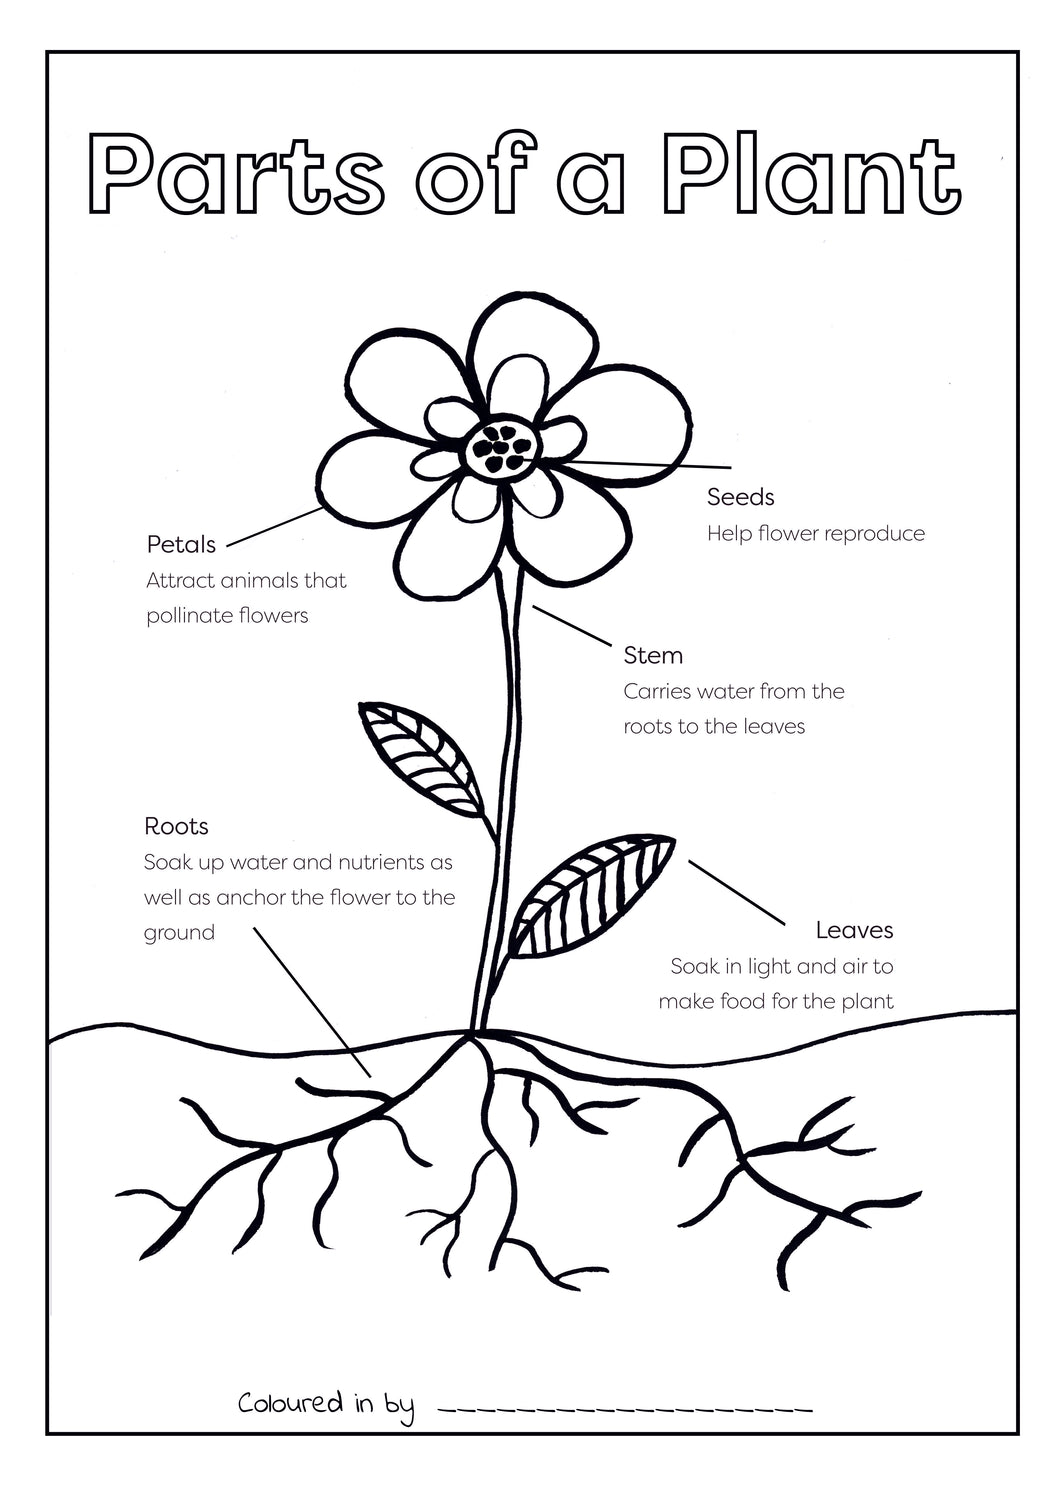 Parts of a plant colouring printable â